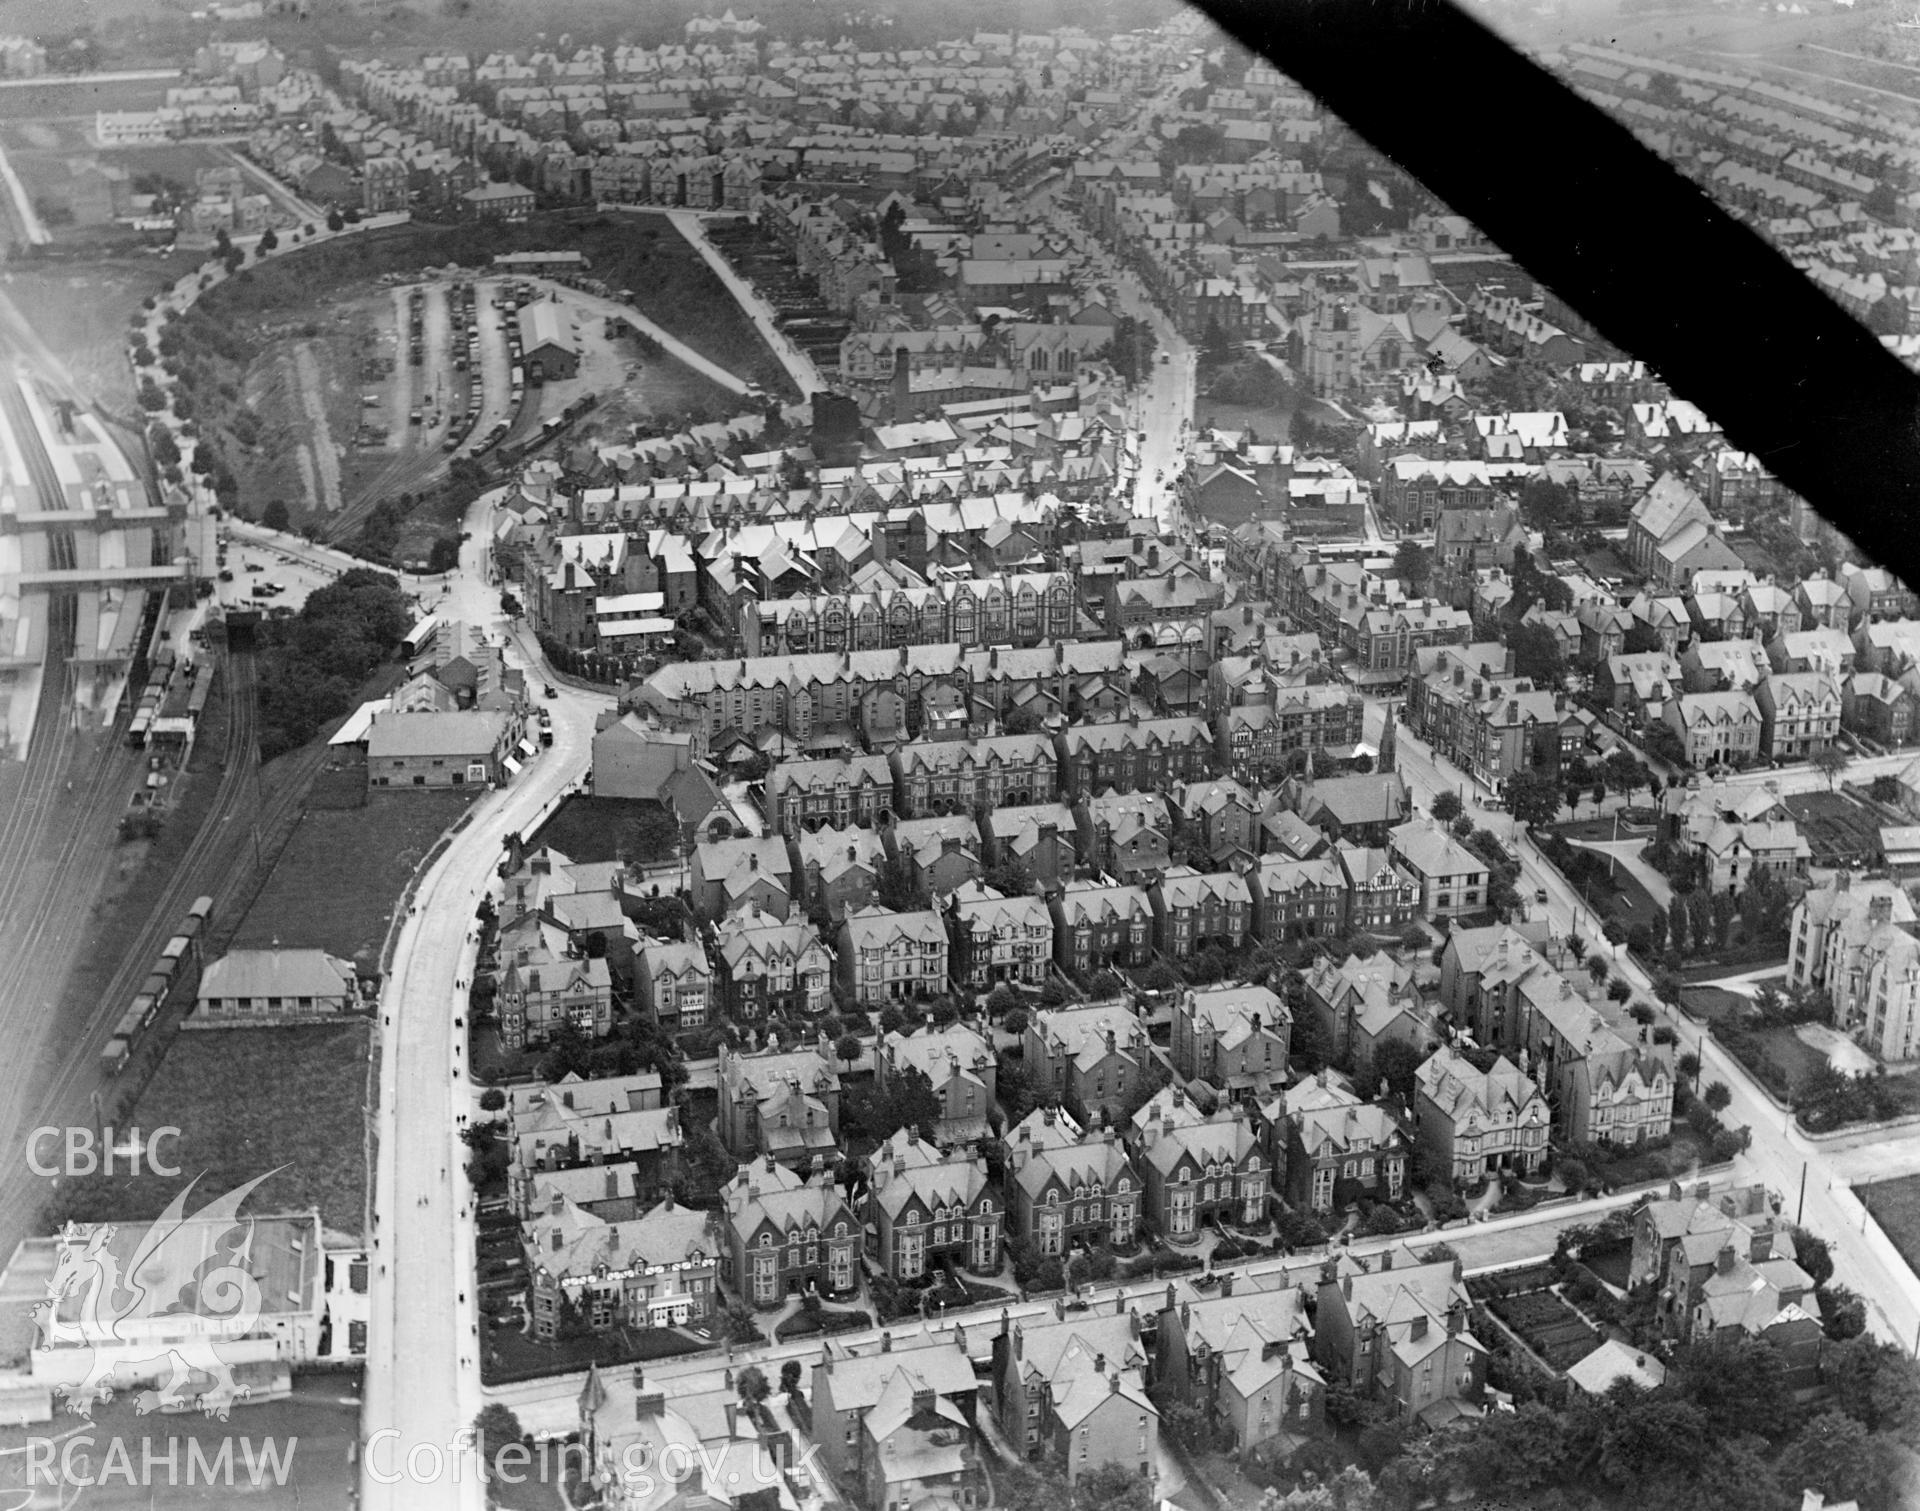 View of Colwyn Bay showing railway station and residential area, oblique aerial view. 5?x4? black and white glass plate negative.